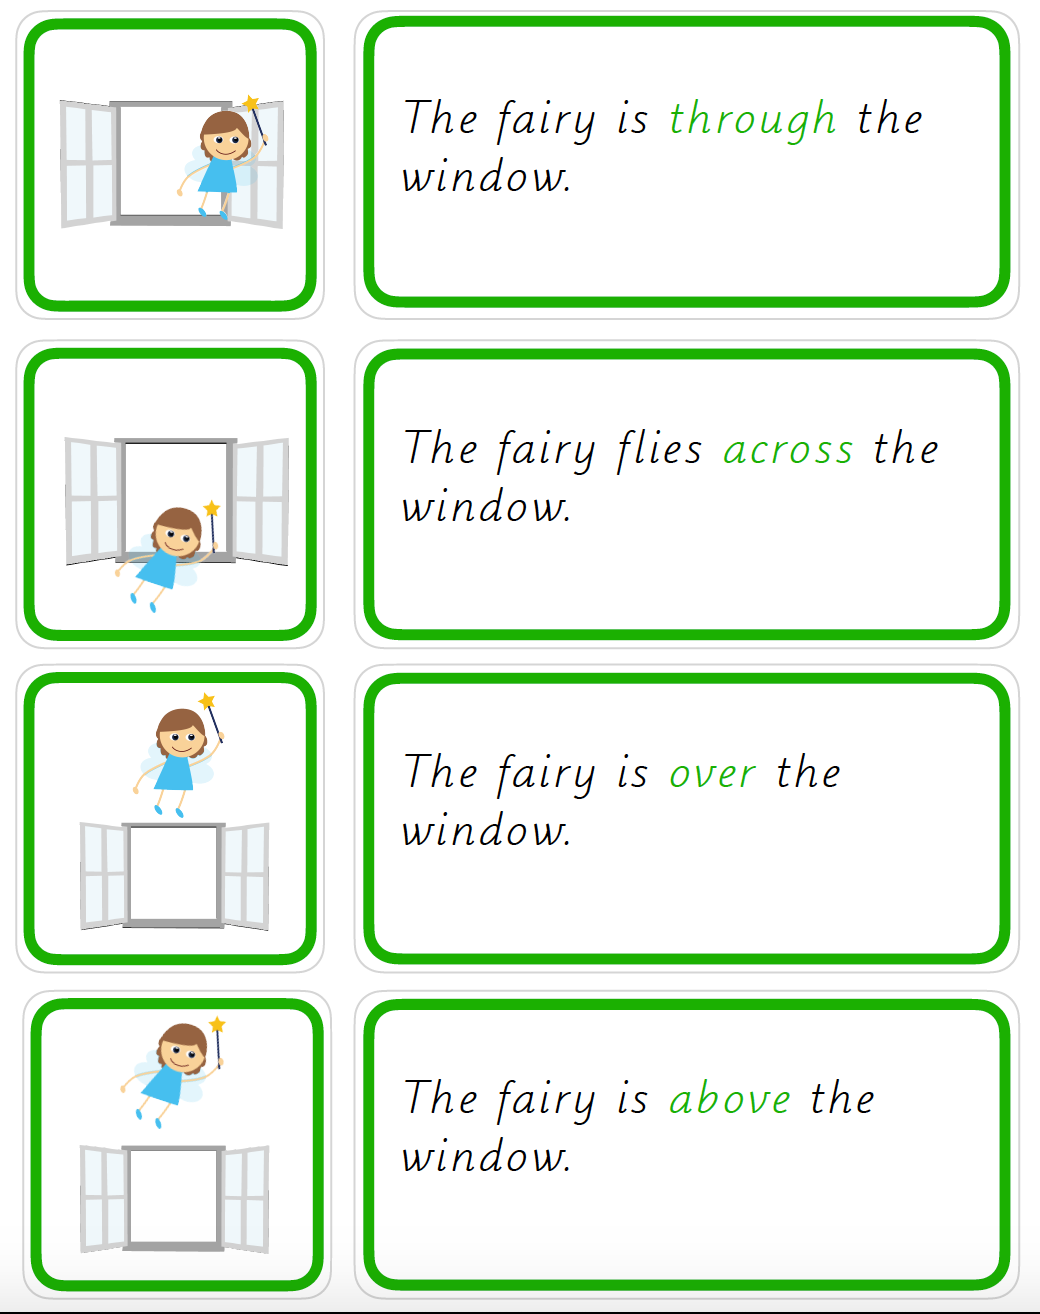 Prepositions - Pictures and Sentences - Simple - Engelsk